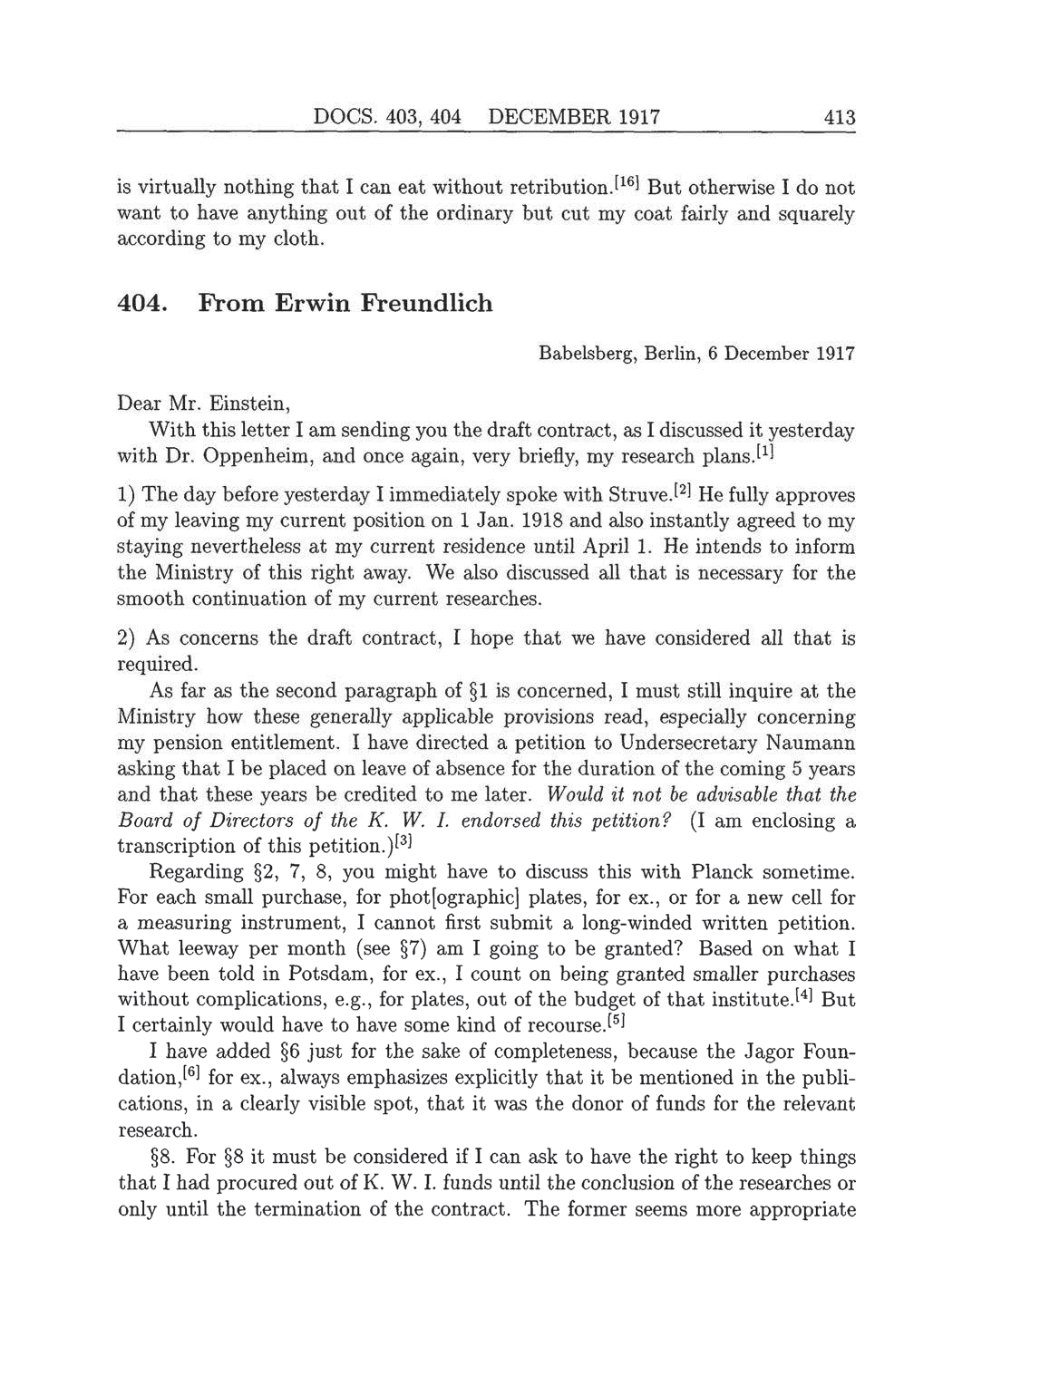 Volume 8: The Berlin Years: Correspondence, 1914-1918 (English translation supplement) page 413